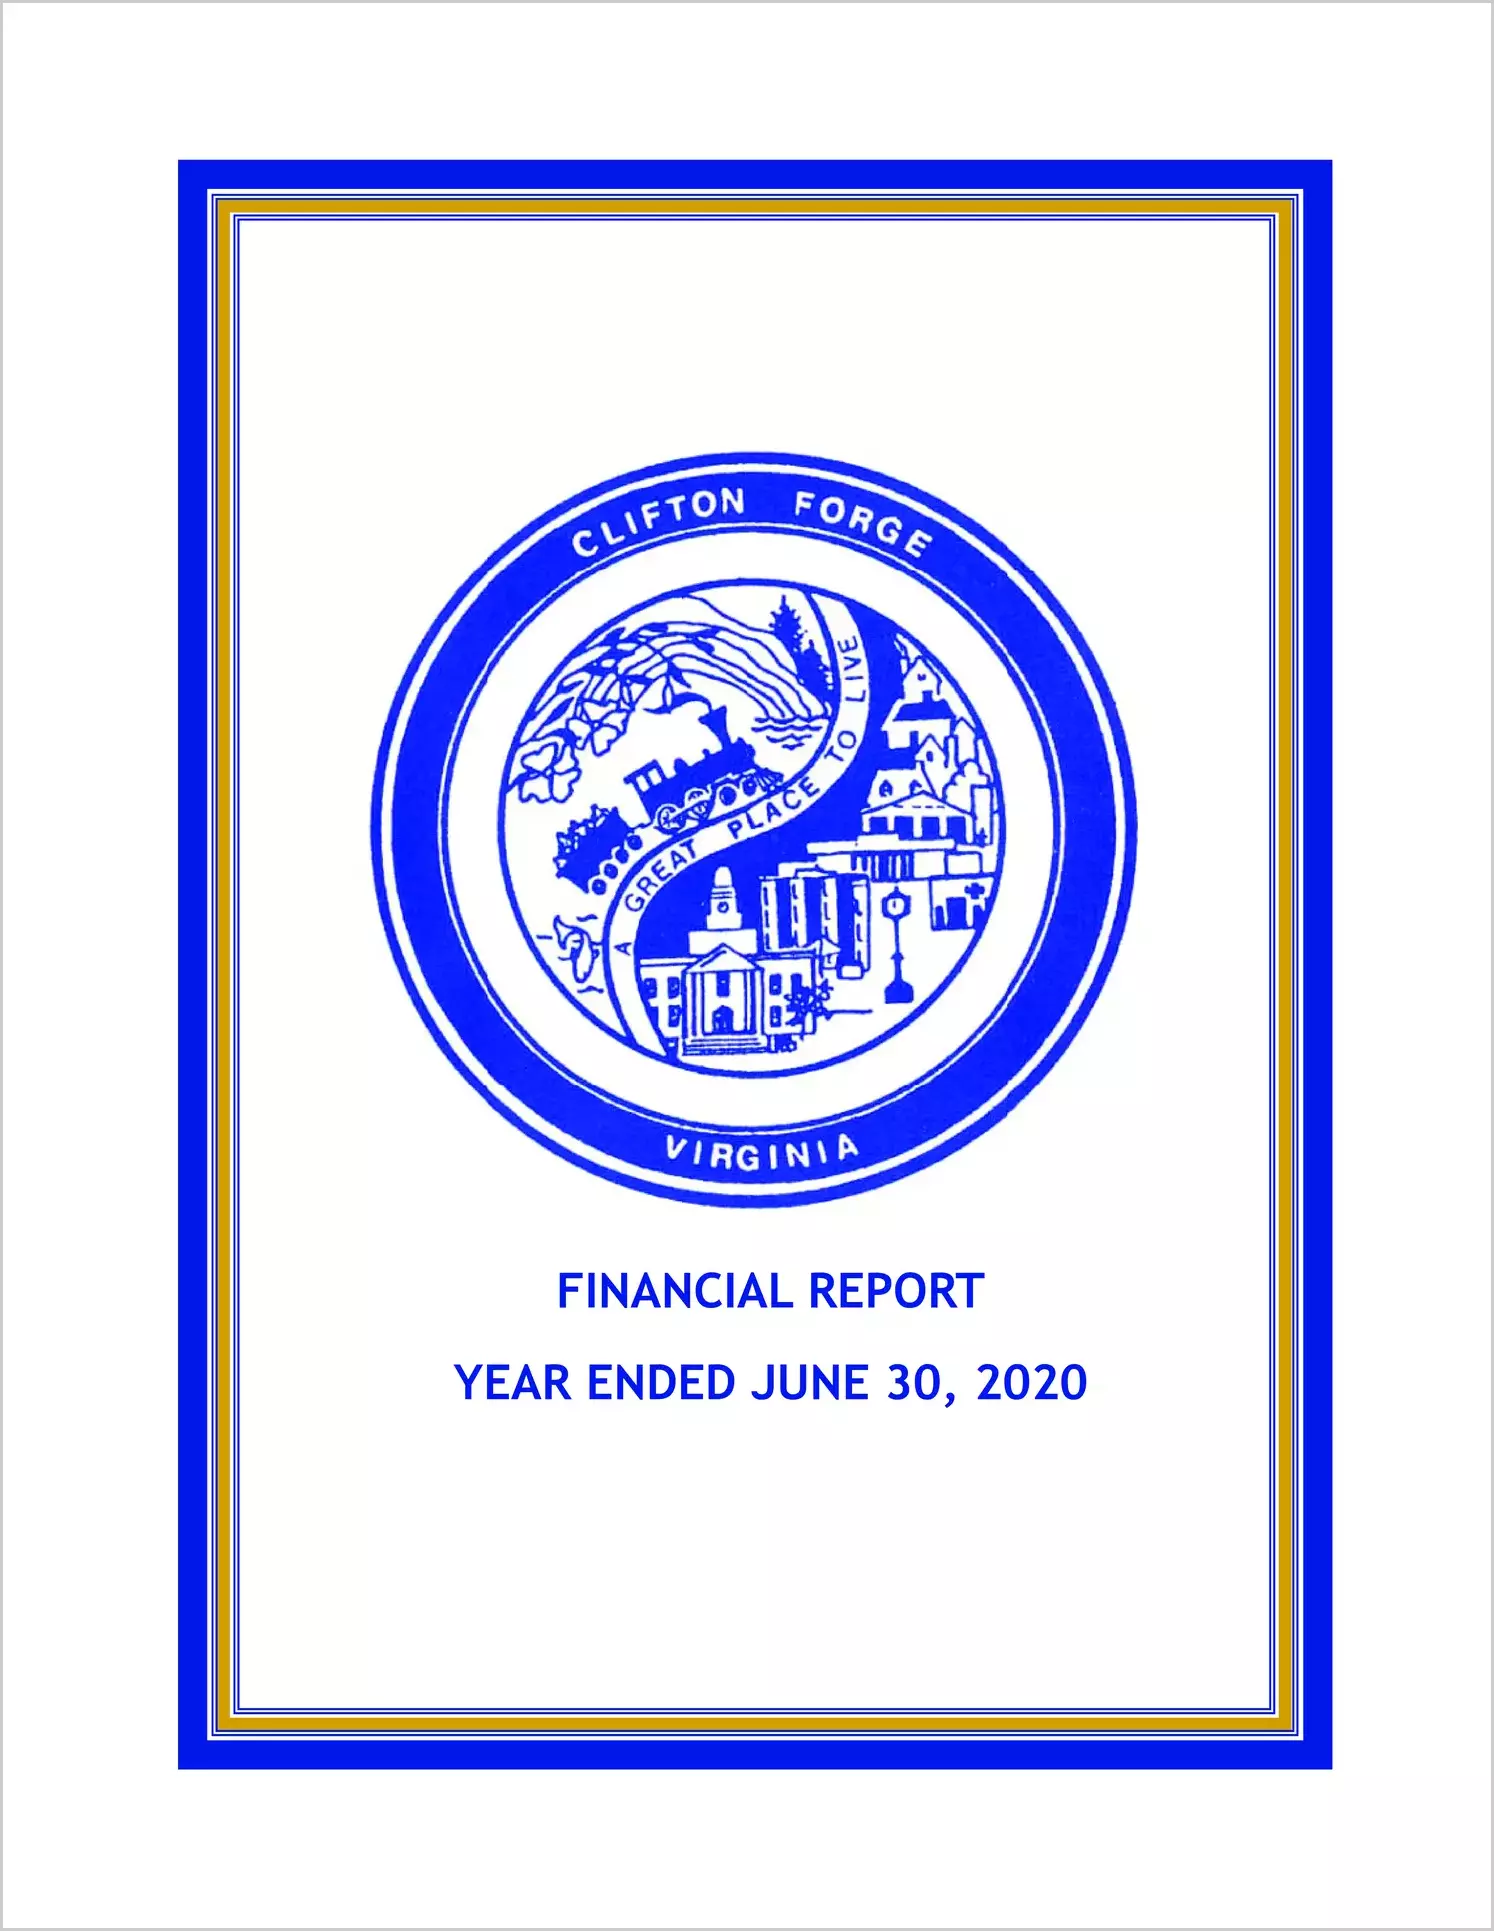 2020 Annual Financial Report for Town of Clifton Forge